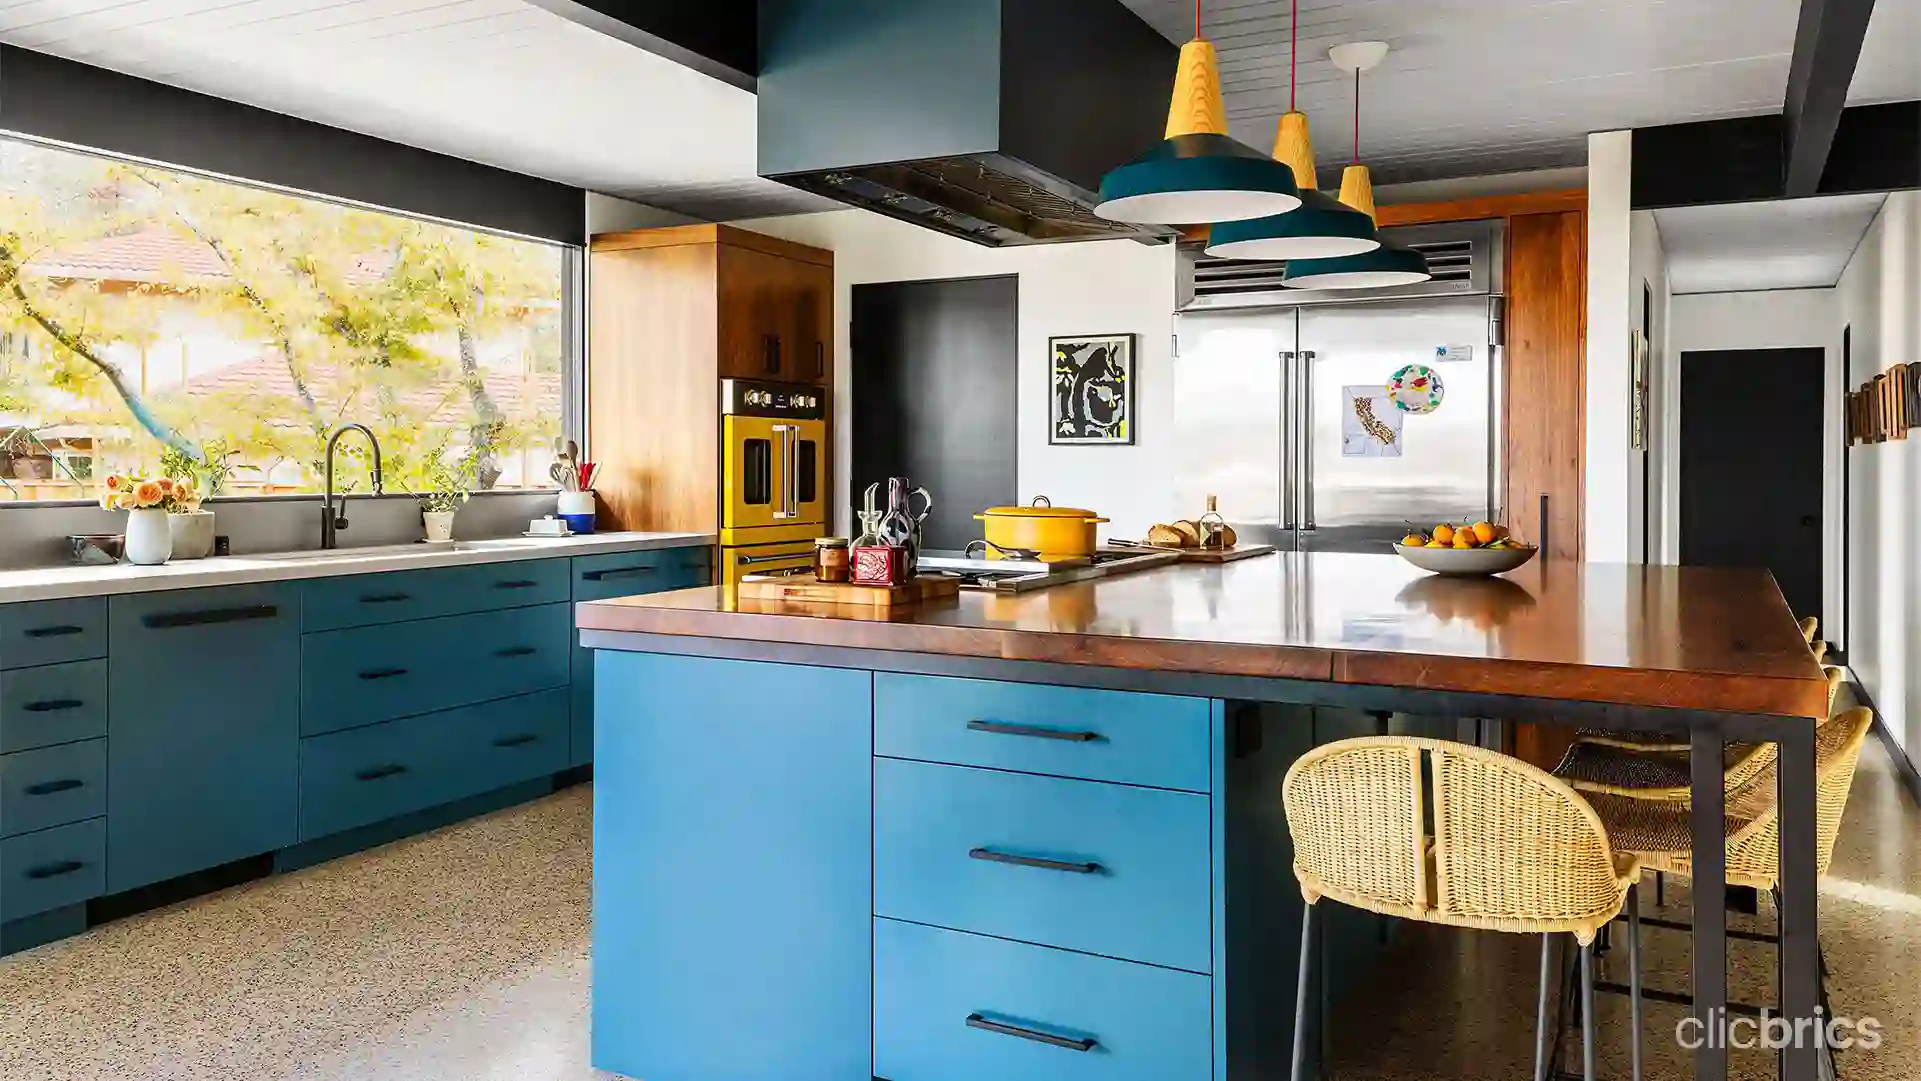 Modular Kitchen Solutions For Short People